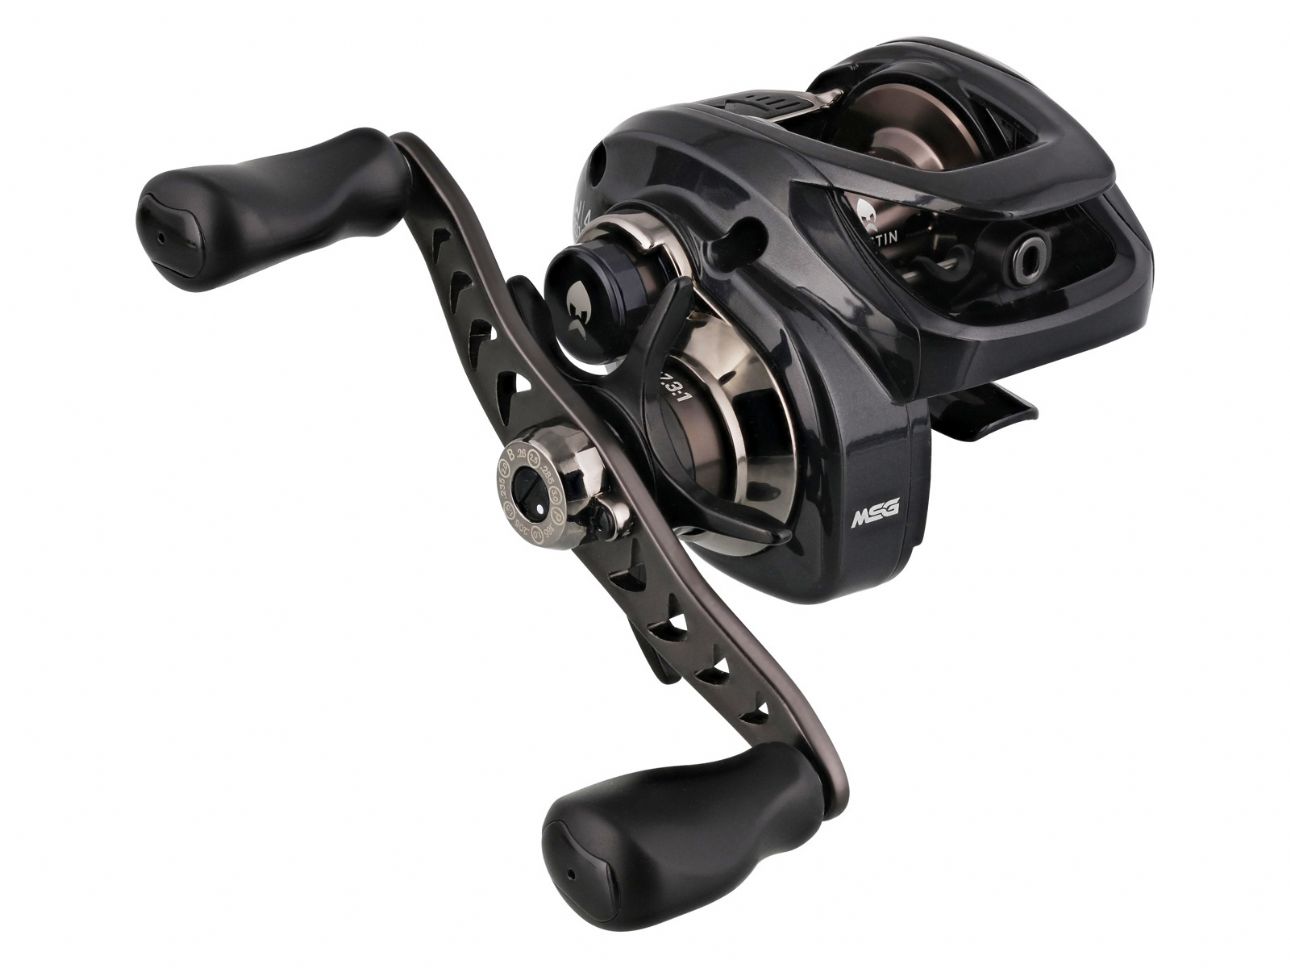 WESTIN W4 HSG BAIT CASTING REELS FROM PREDATOR TACKLE*